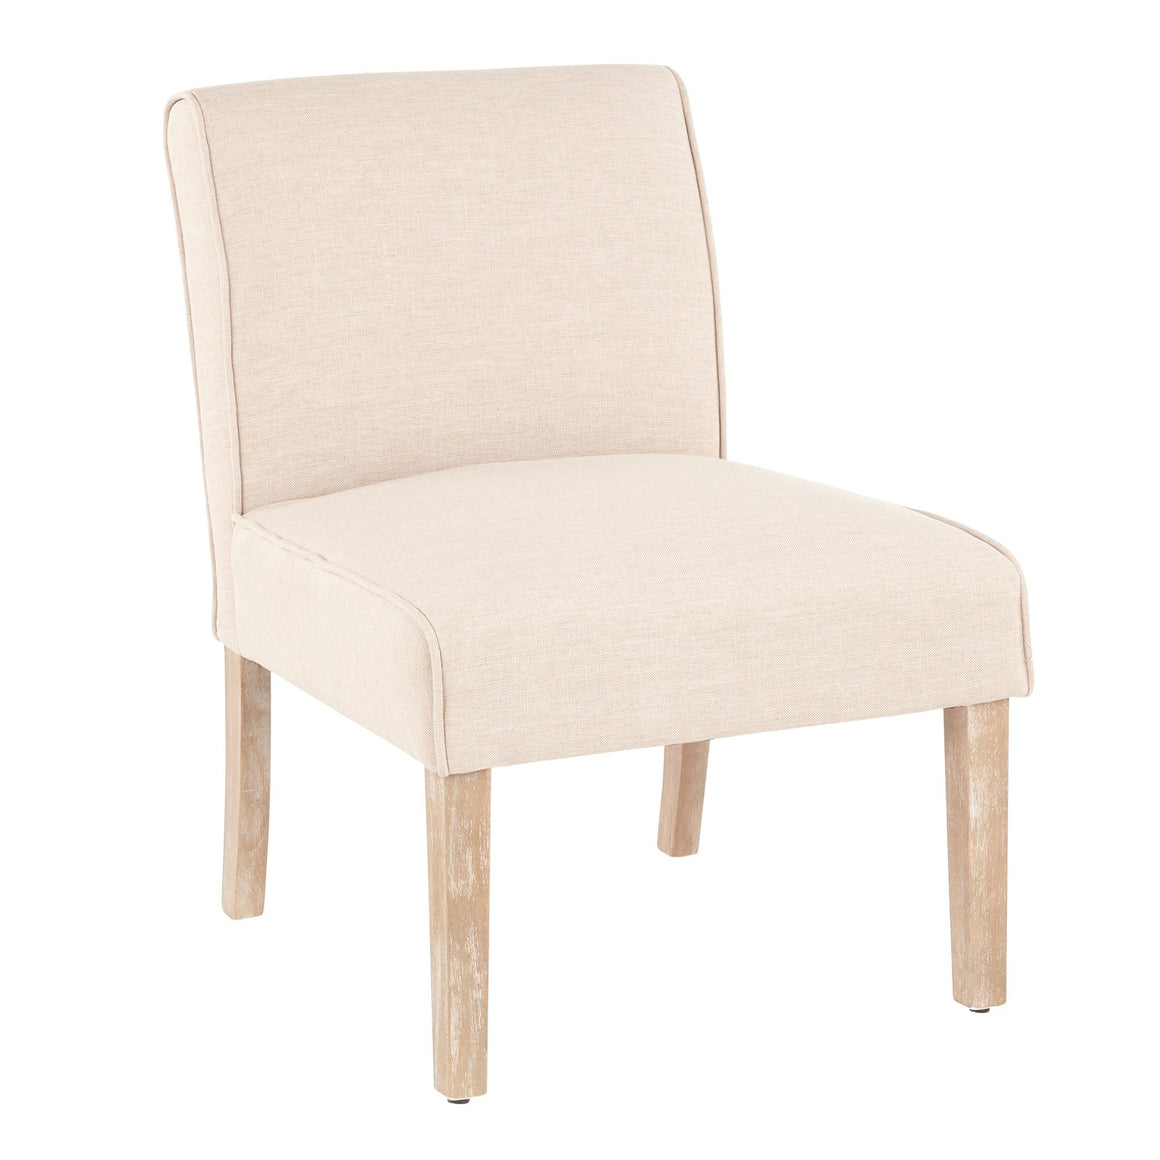 Vintage Neo Contemporary Accent Chair in White Washed Wooden Legs and Beige Fabric by LumiSource